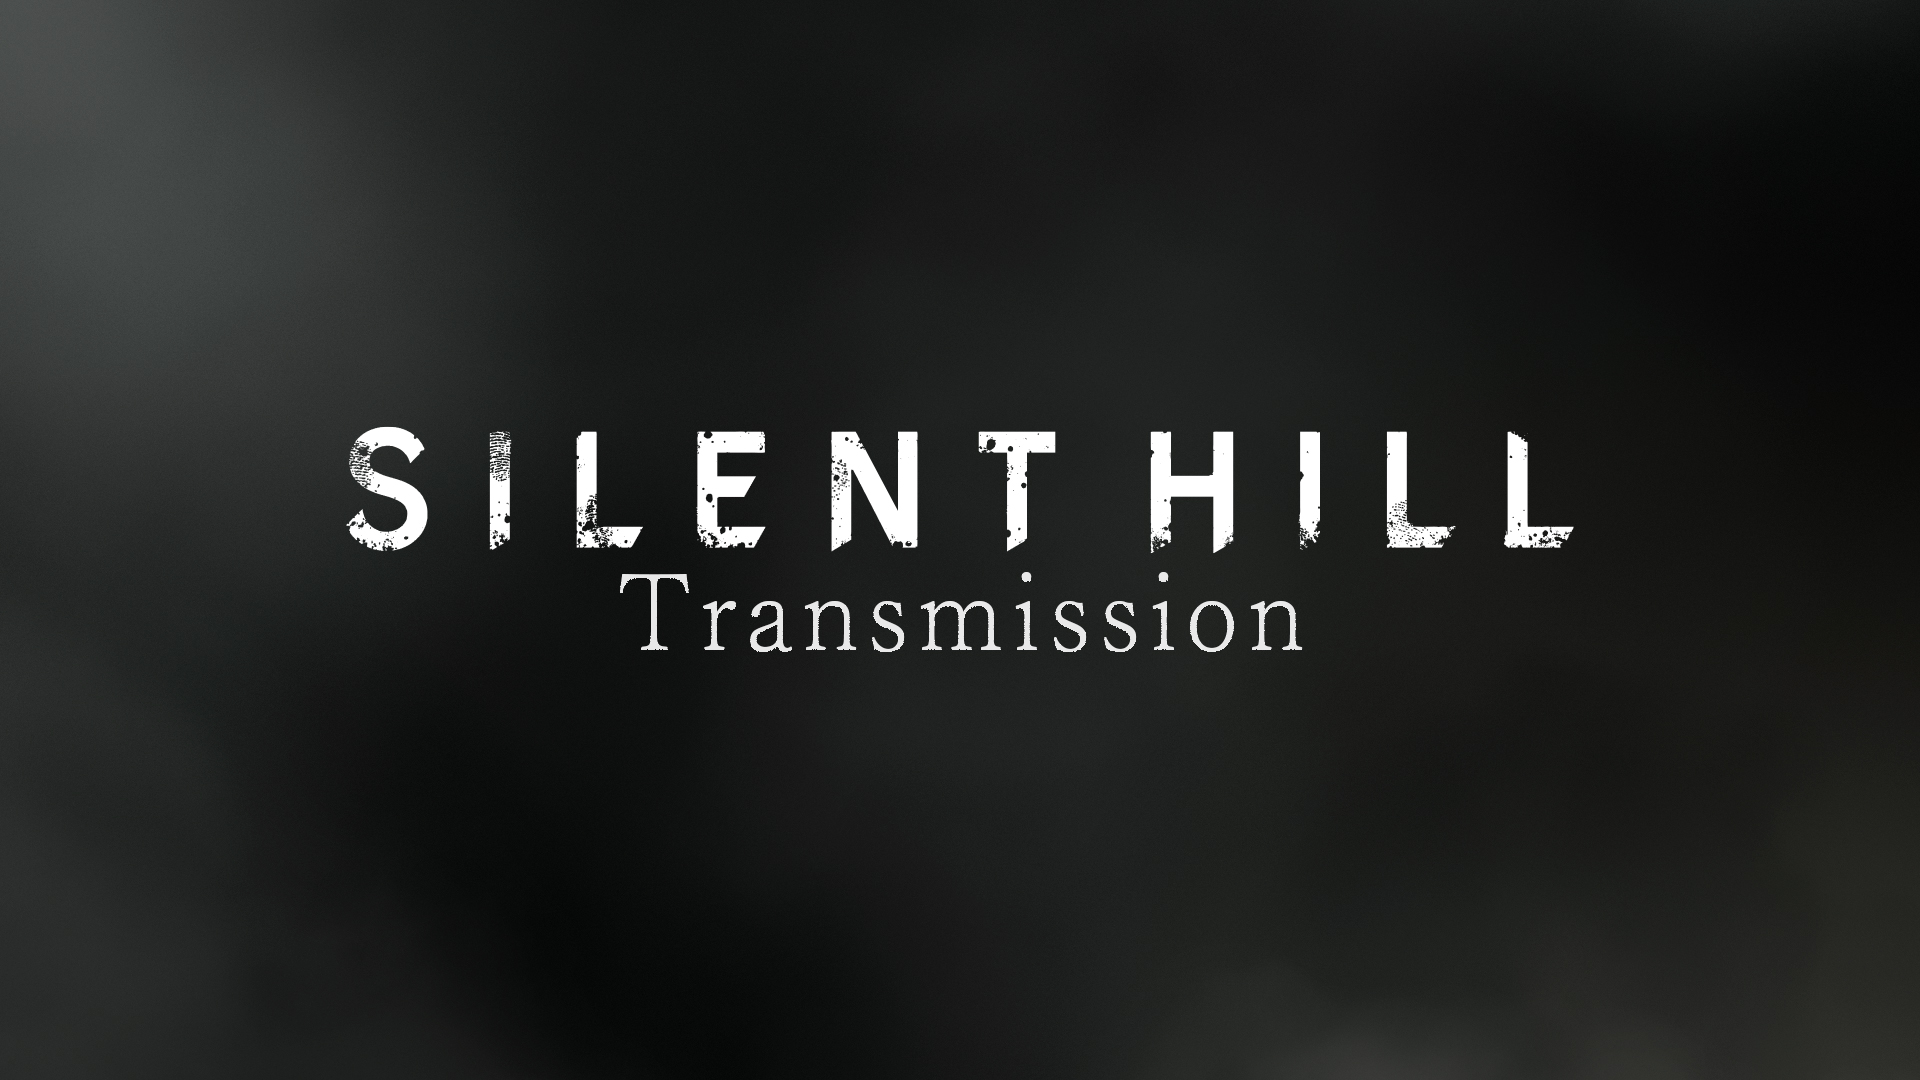 Silent Hill Transmission Showcase Planned for May 30